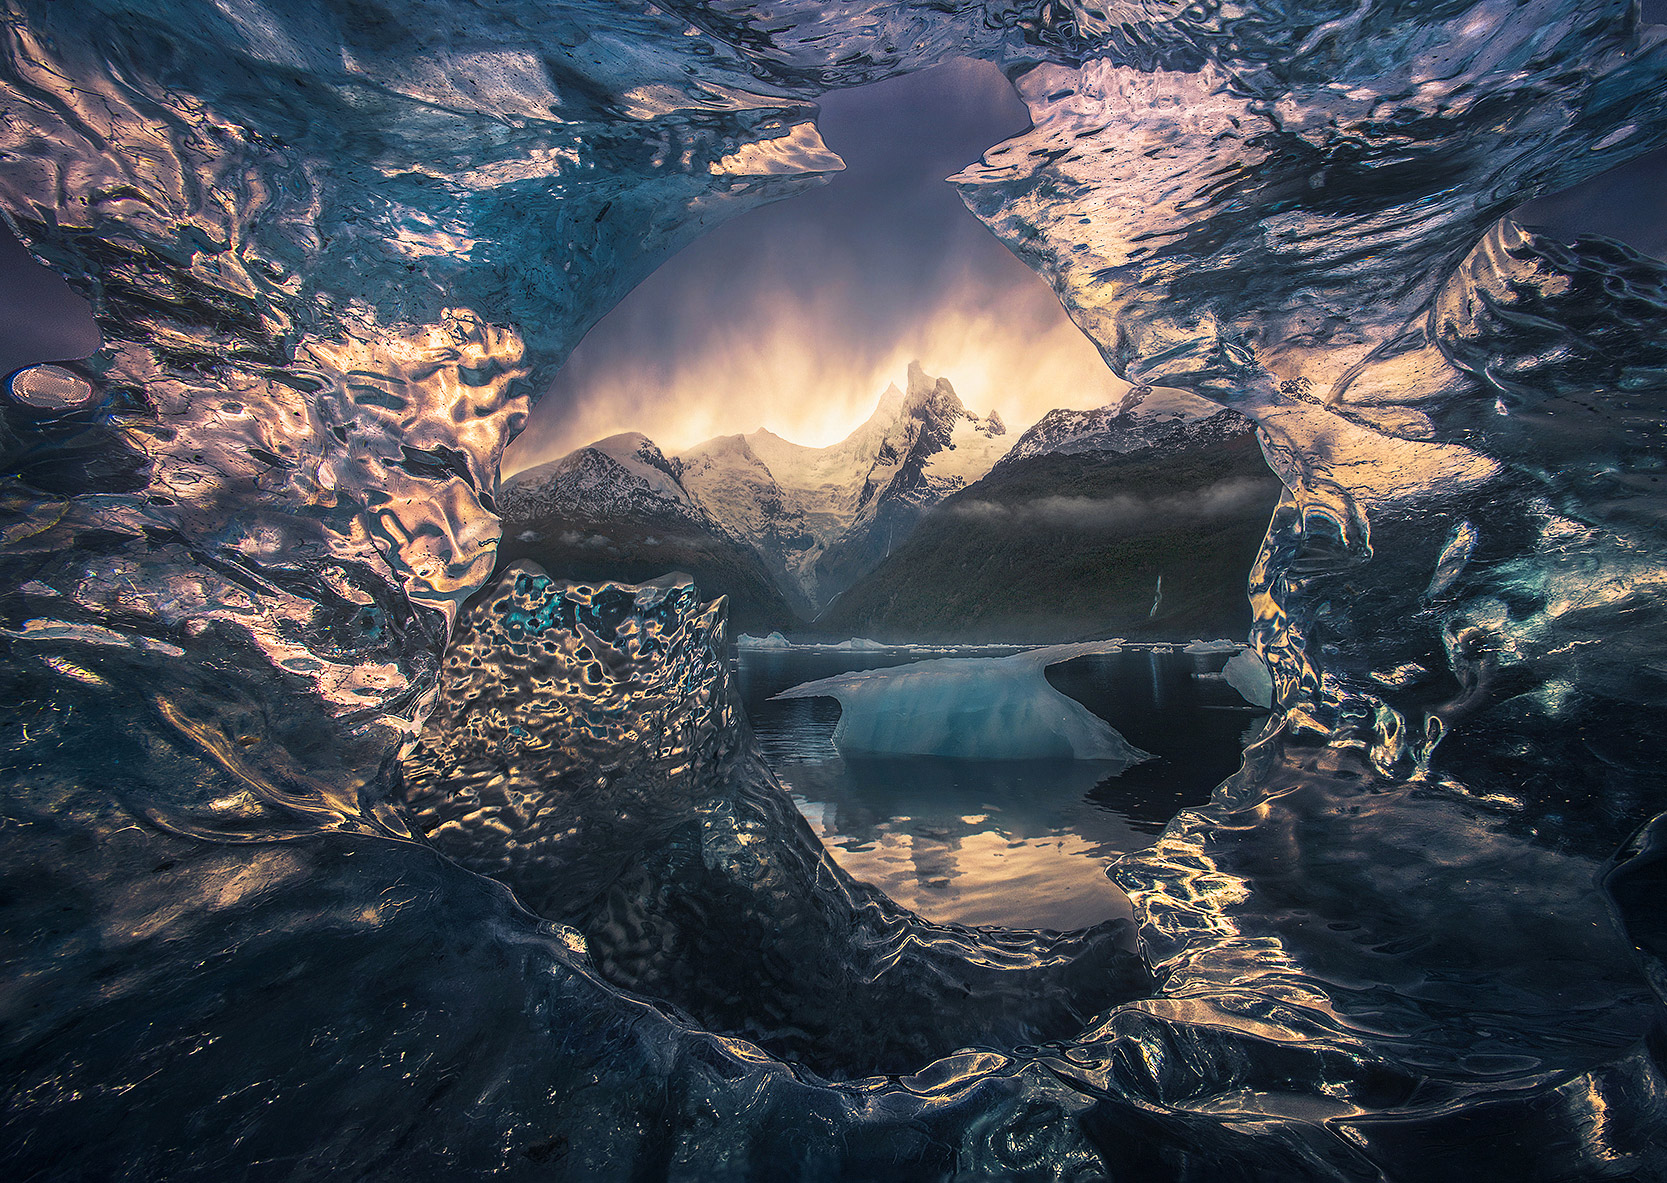 Looking through beached iceberg provides a window through layers of crystal ice framing giant and unexplored peaks beyond in...